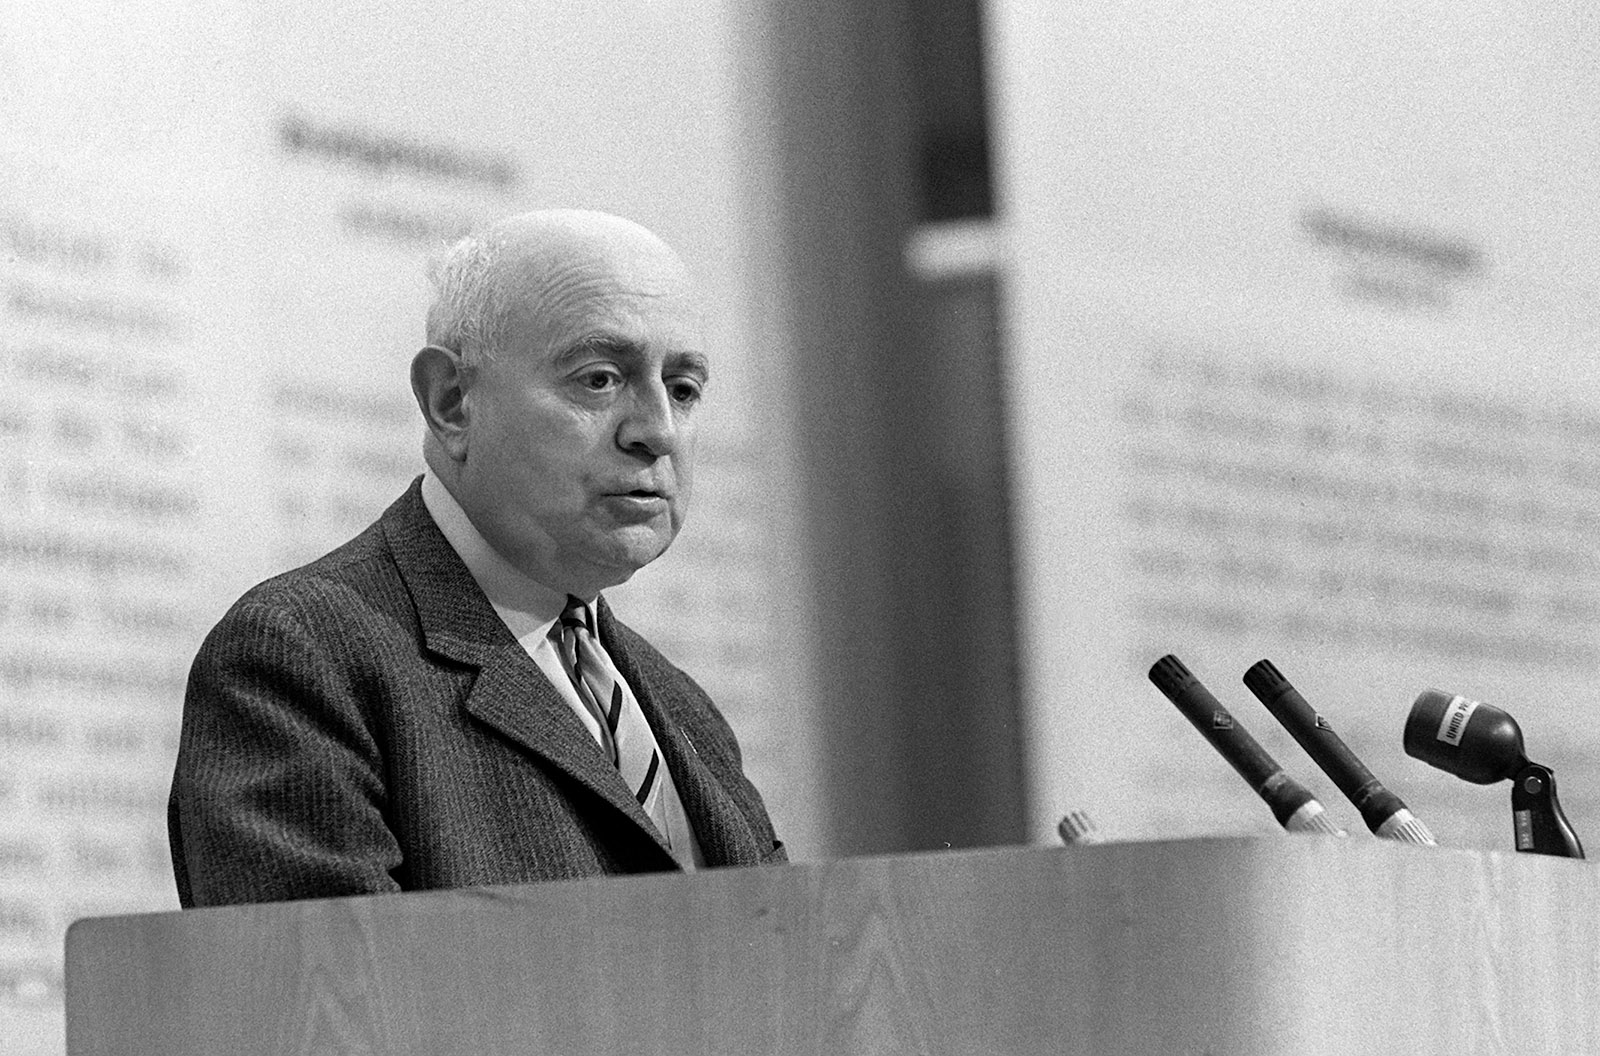 Theodor Adorno addressing an audience of German intellectuals opposed to the Emergency Acts, Frankfurt am Main, West Germany, May 28, 1968